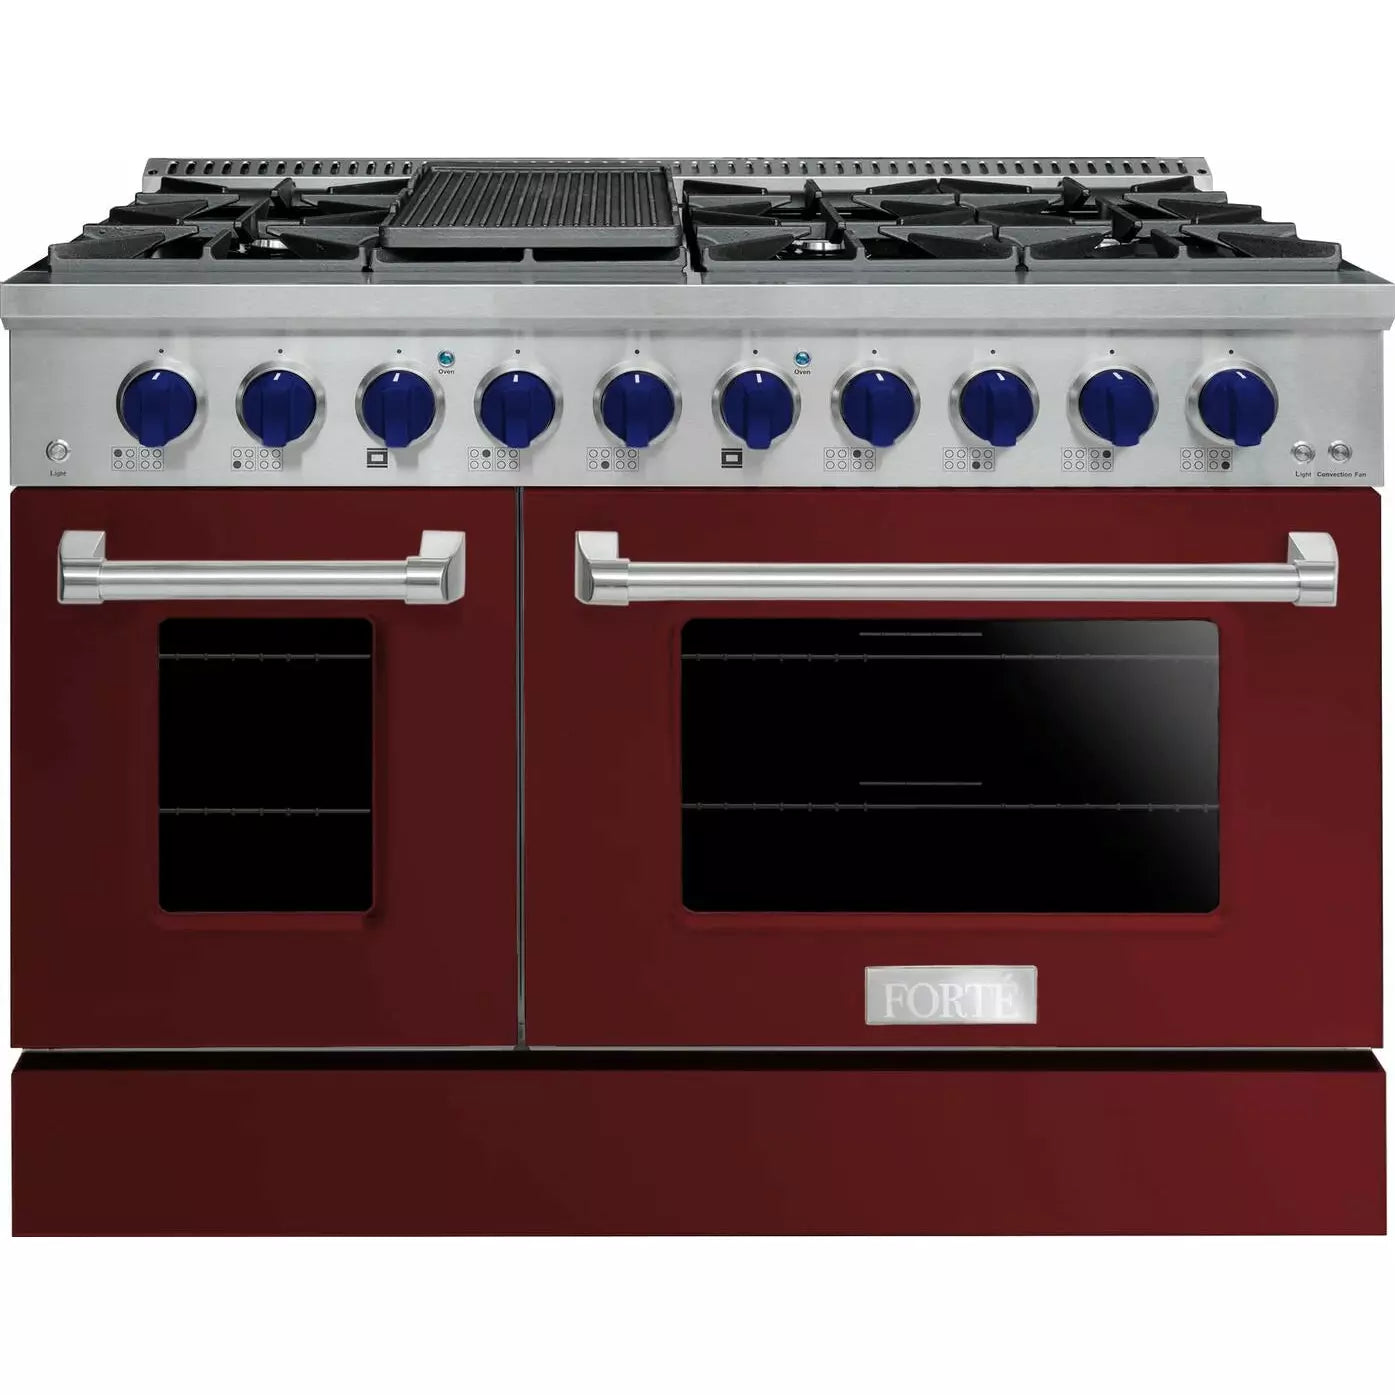 Forte 48" Freestanding All Gas Range - 8 Sealed Italian Made Burners, 5.53 cu. ft. Oven & Griddle - in Stainless Steel With Burgundy Door And Brass Knob (FGR488BBG4)